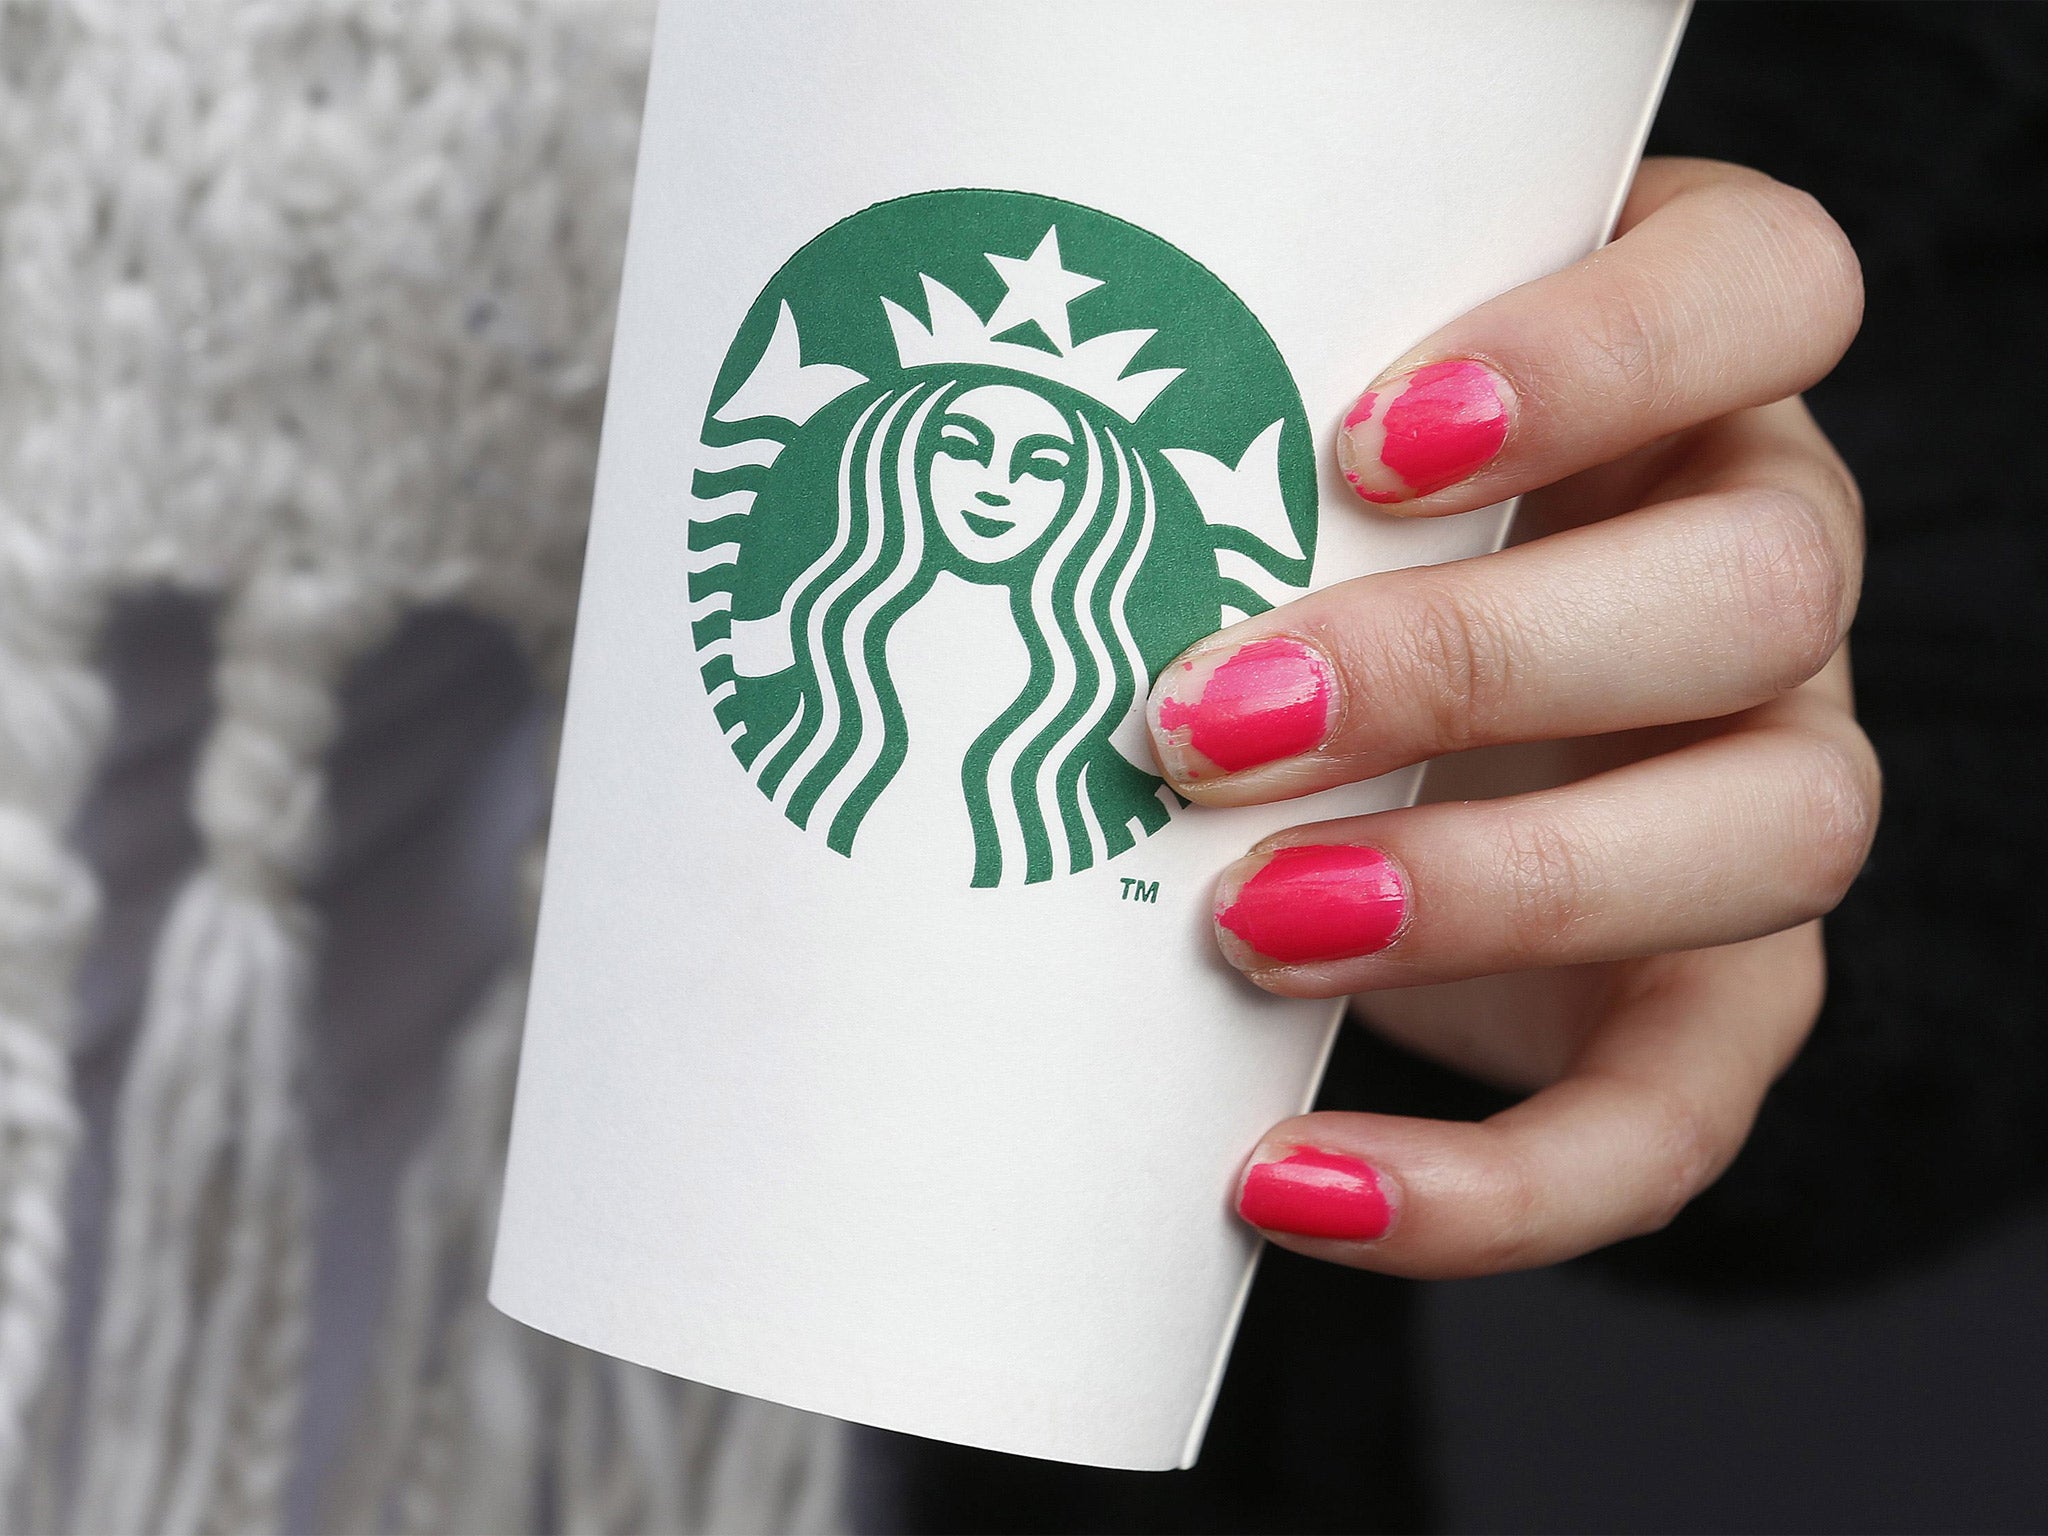 Starbucks has agreed to increase its rate of corporation tax contributions